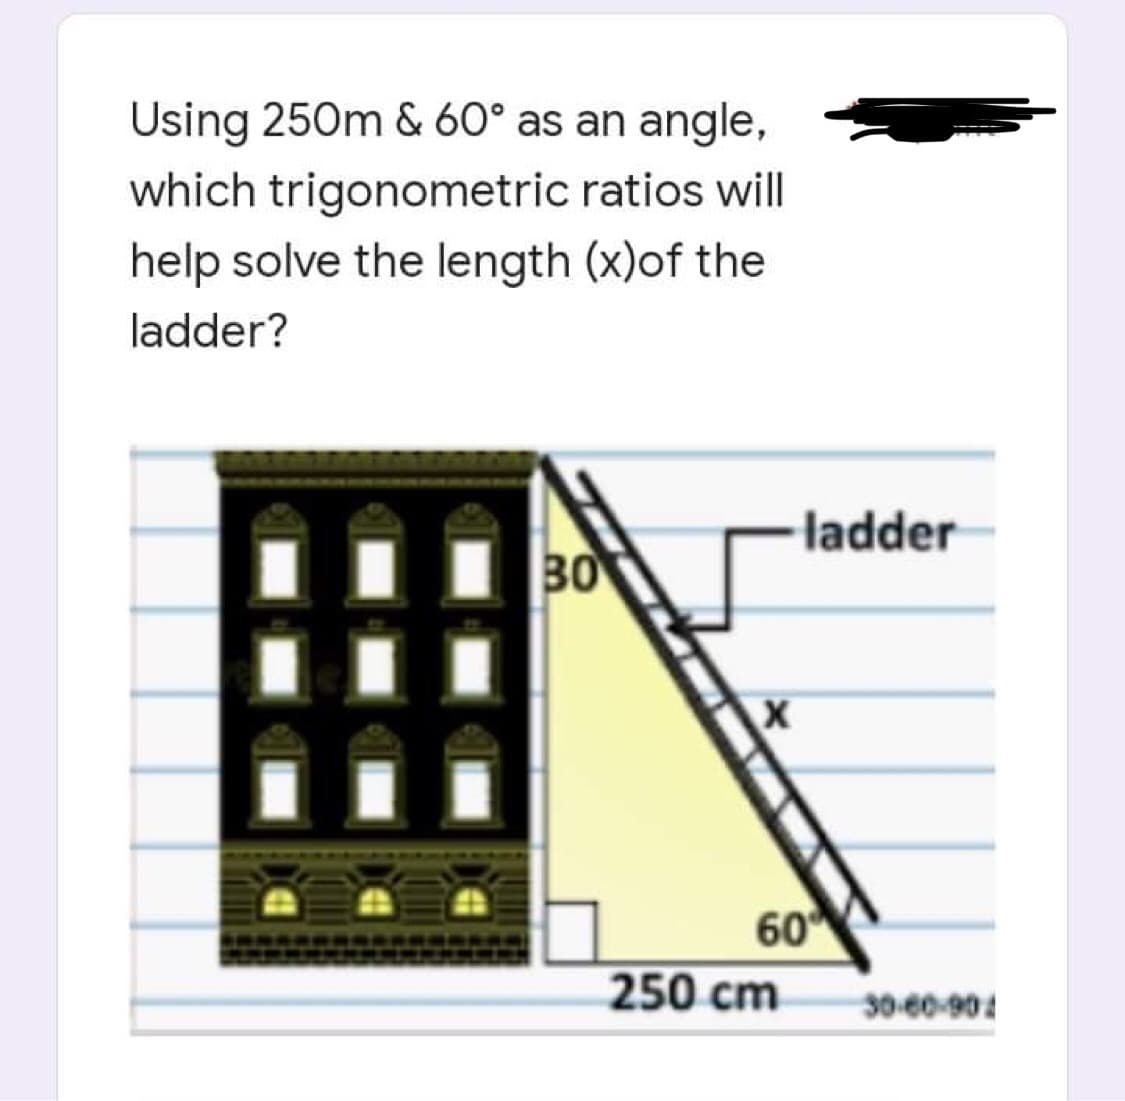 Using 250m & 60° as an angle,
which trigonometric ratios will
help solve the length (x)of the
ladder?
30
ladder
60
250 cm
30-60-90